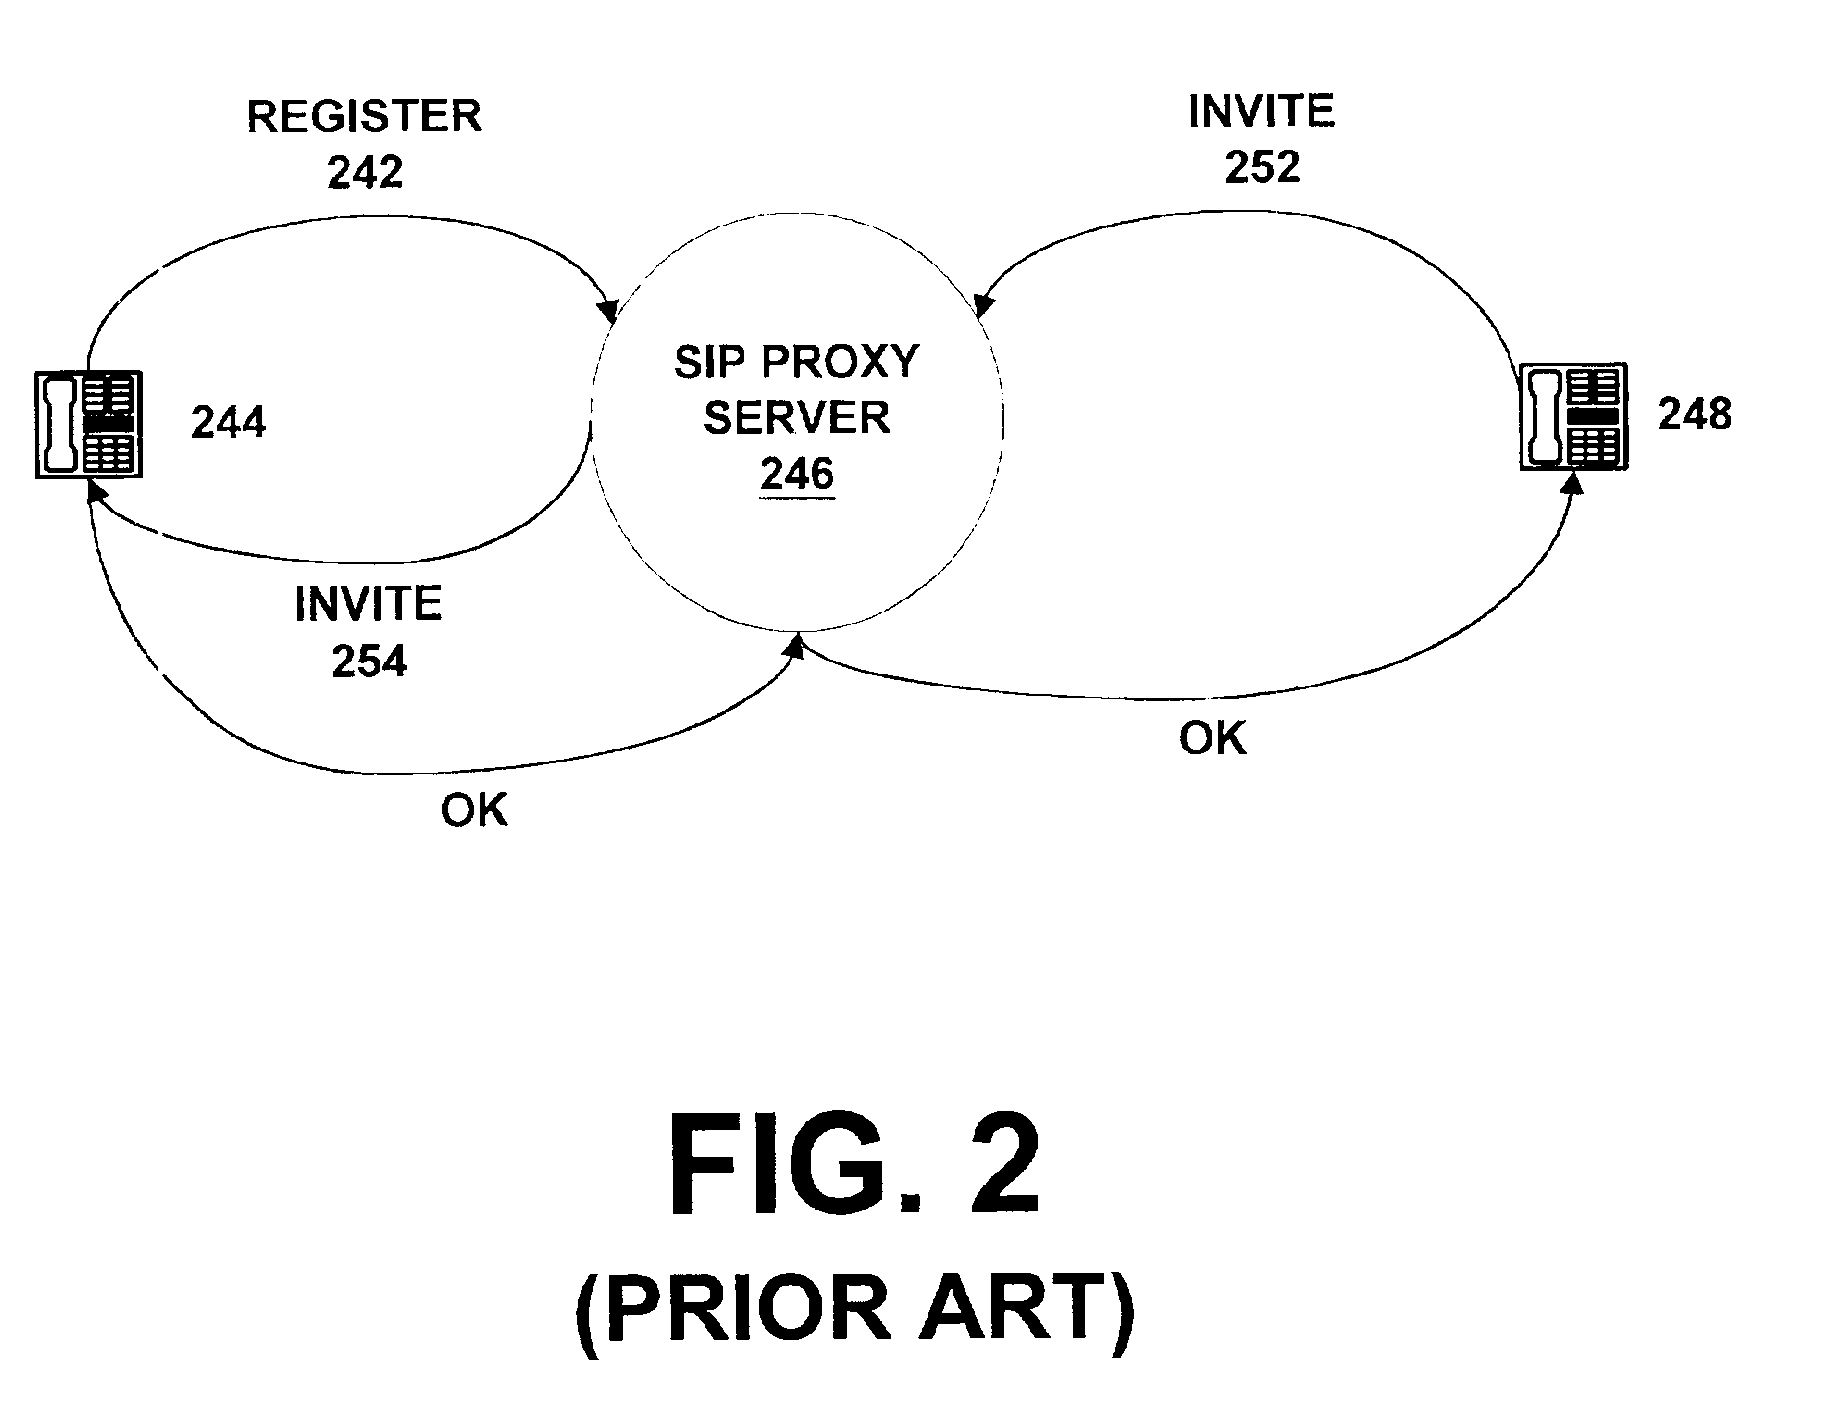 System and method for assisting in controlling real-time transport protocol flow through multiple networks via screening